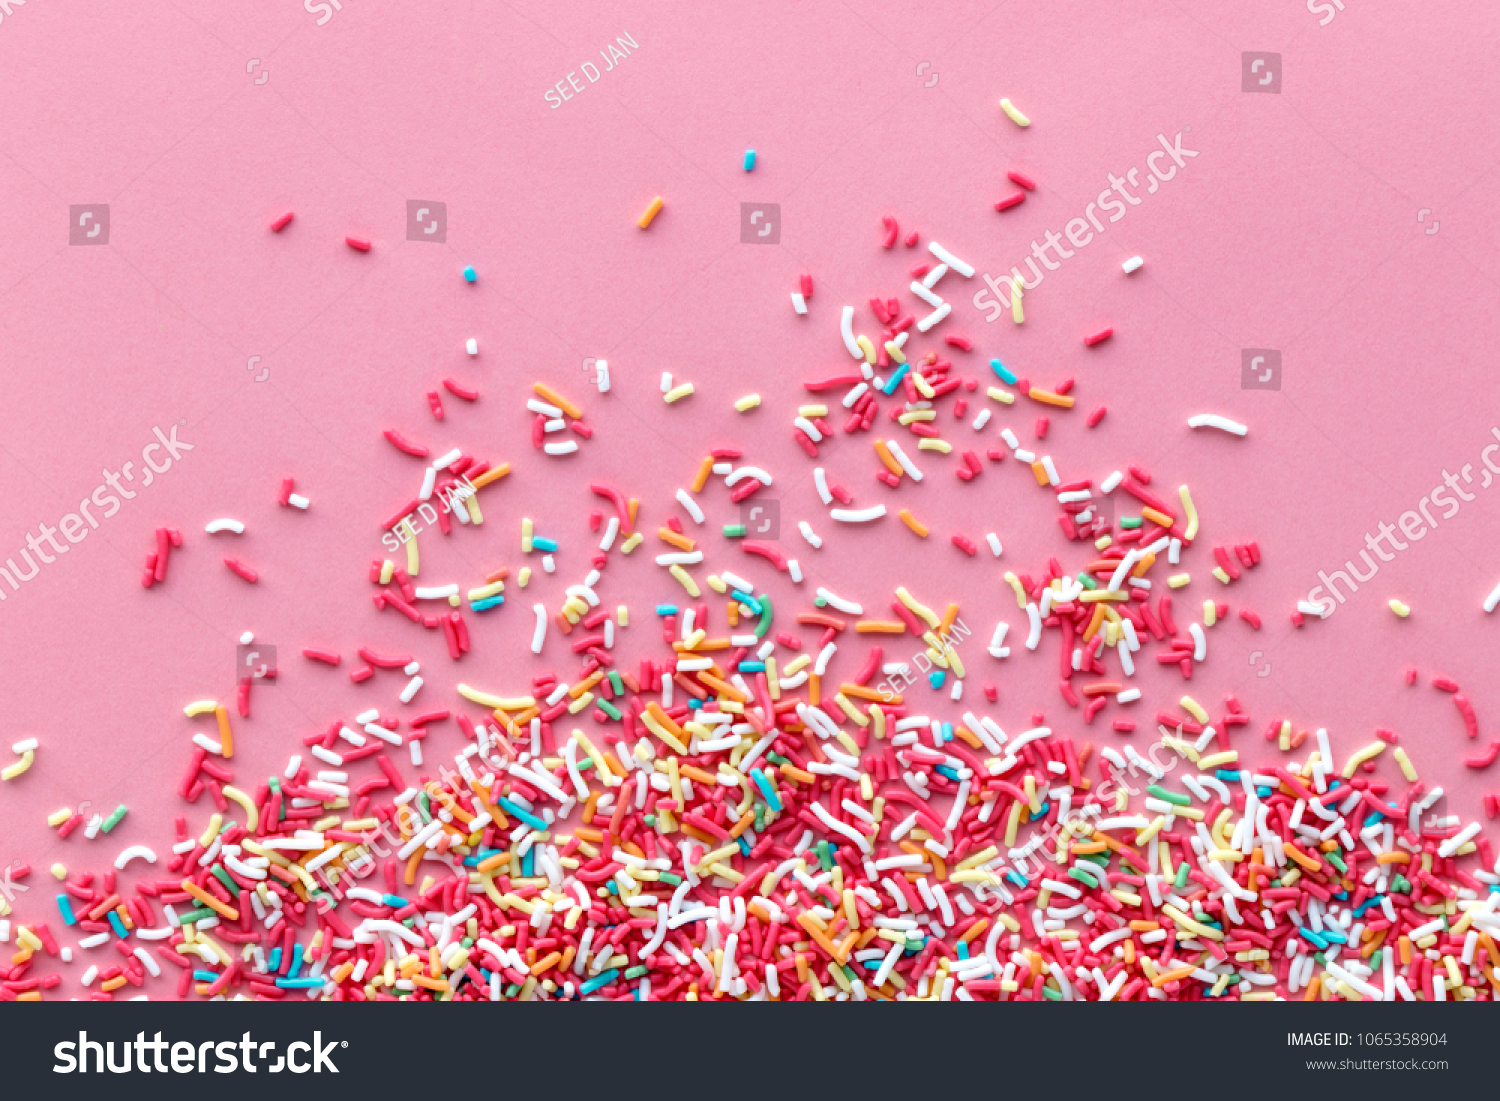 Colorful sprinkles on a pink background, top view with copy space #1065358904